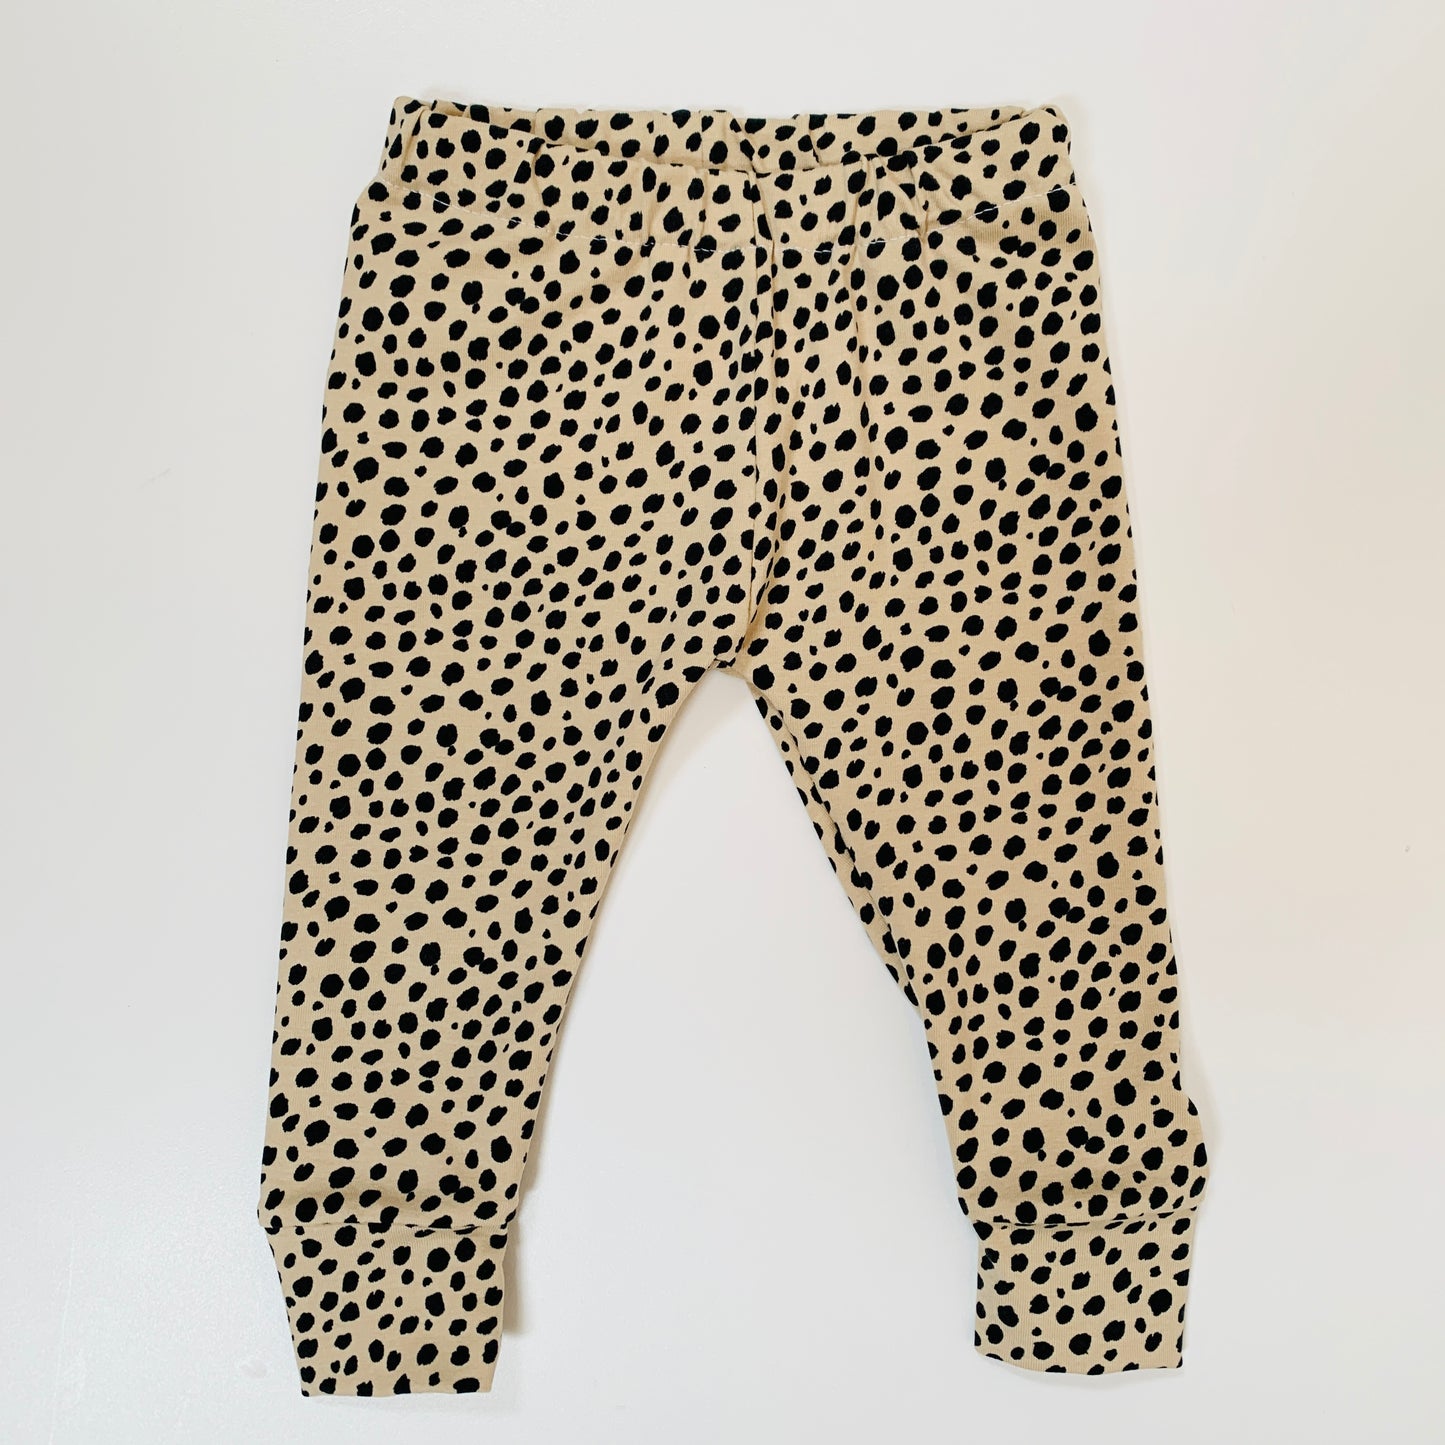 Dalmatian Spot Child and Baby Leggings SIZE 0-3, 2-3